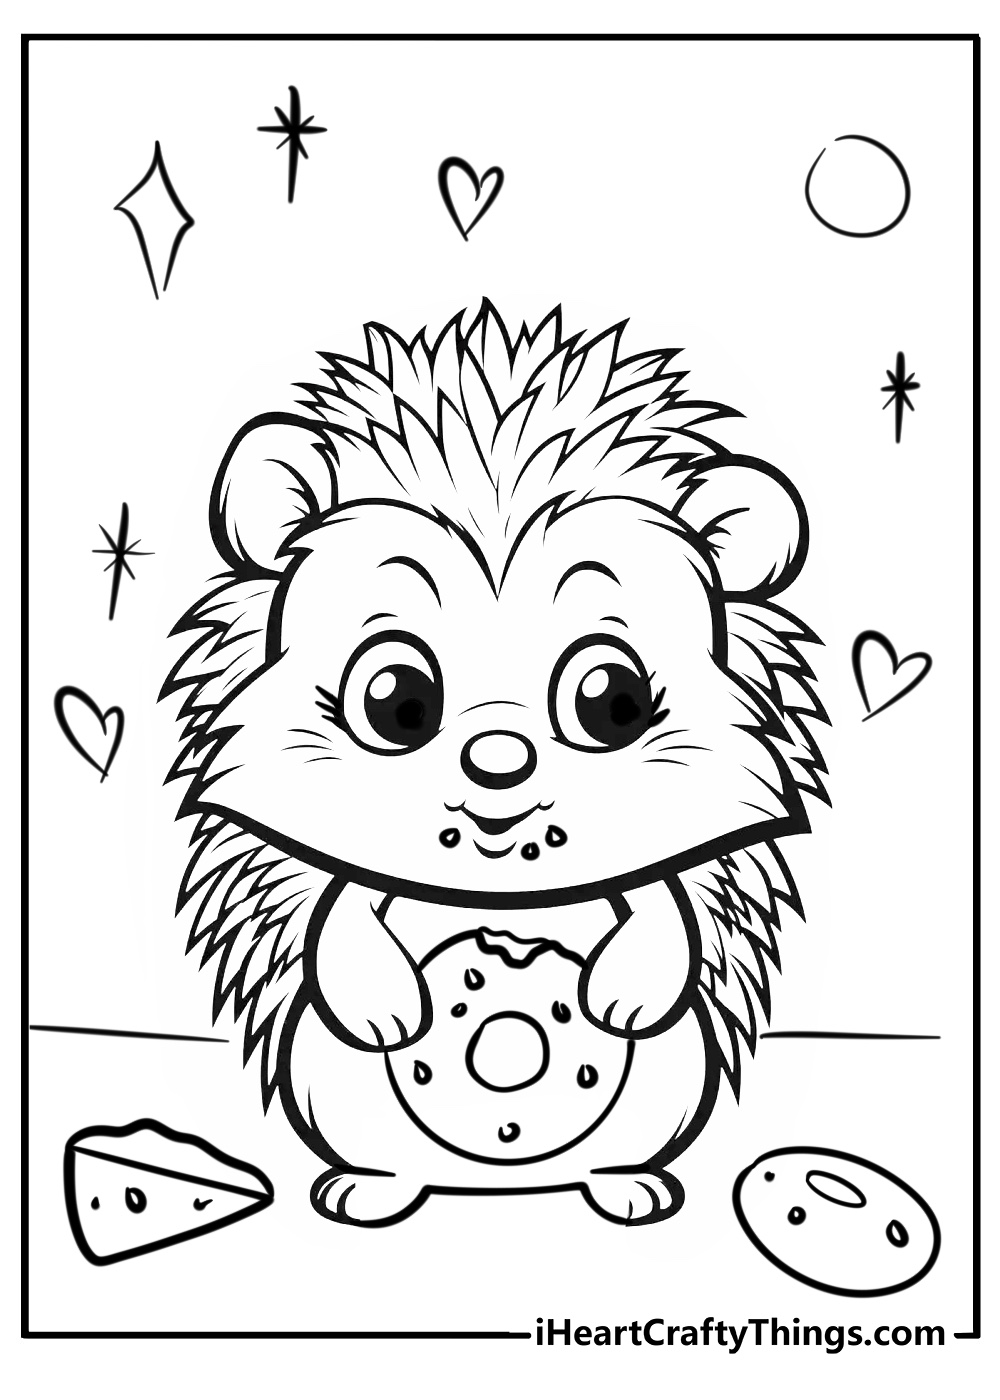 Cute animals coloring page of hedgehog eating mini donuts